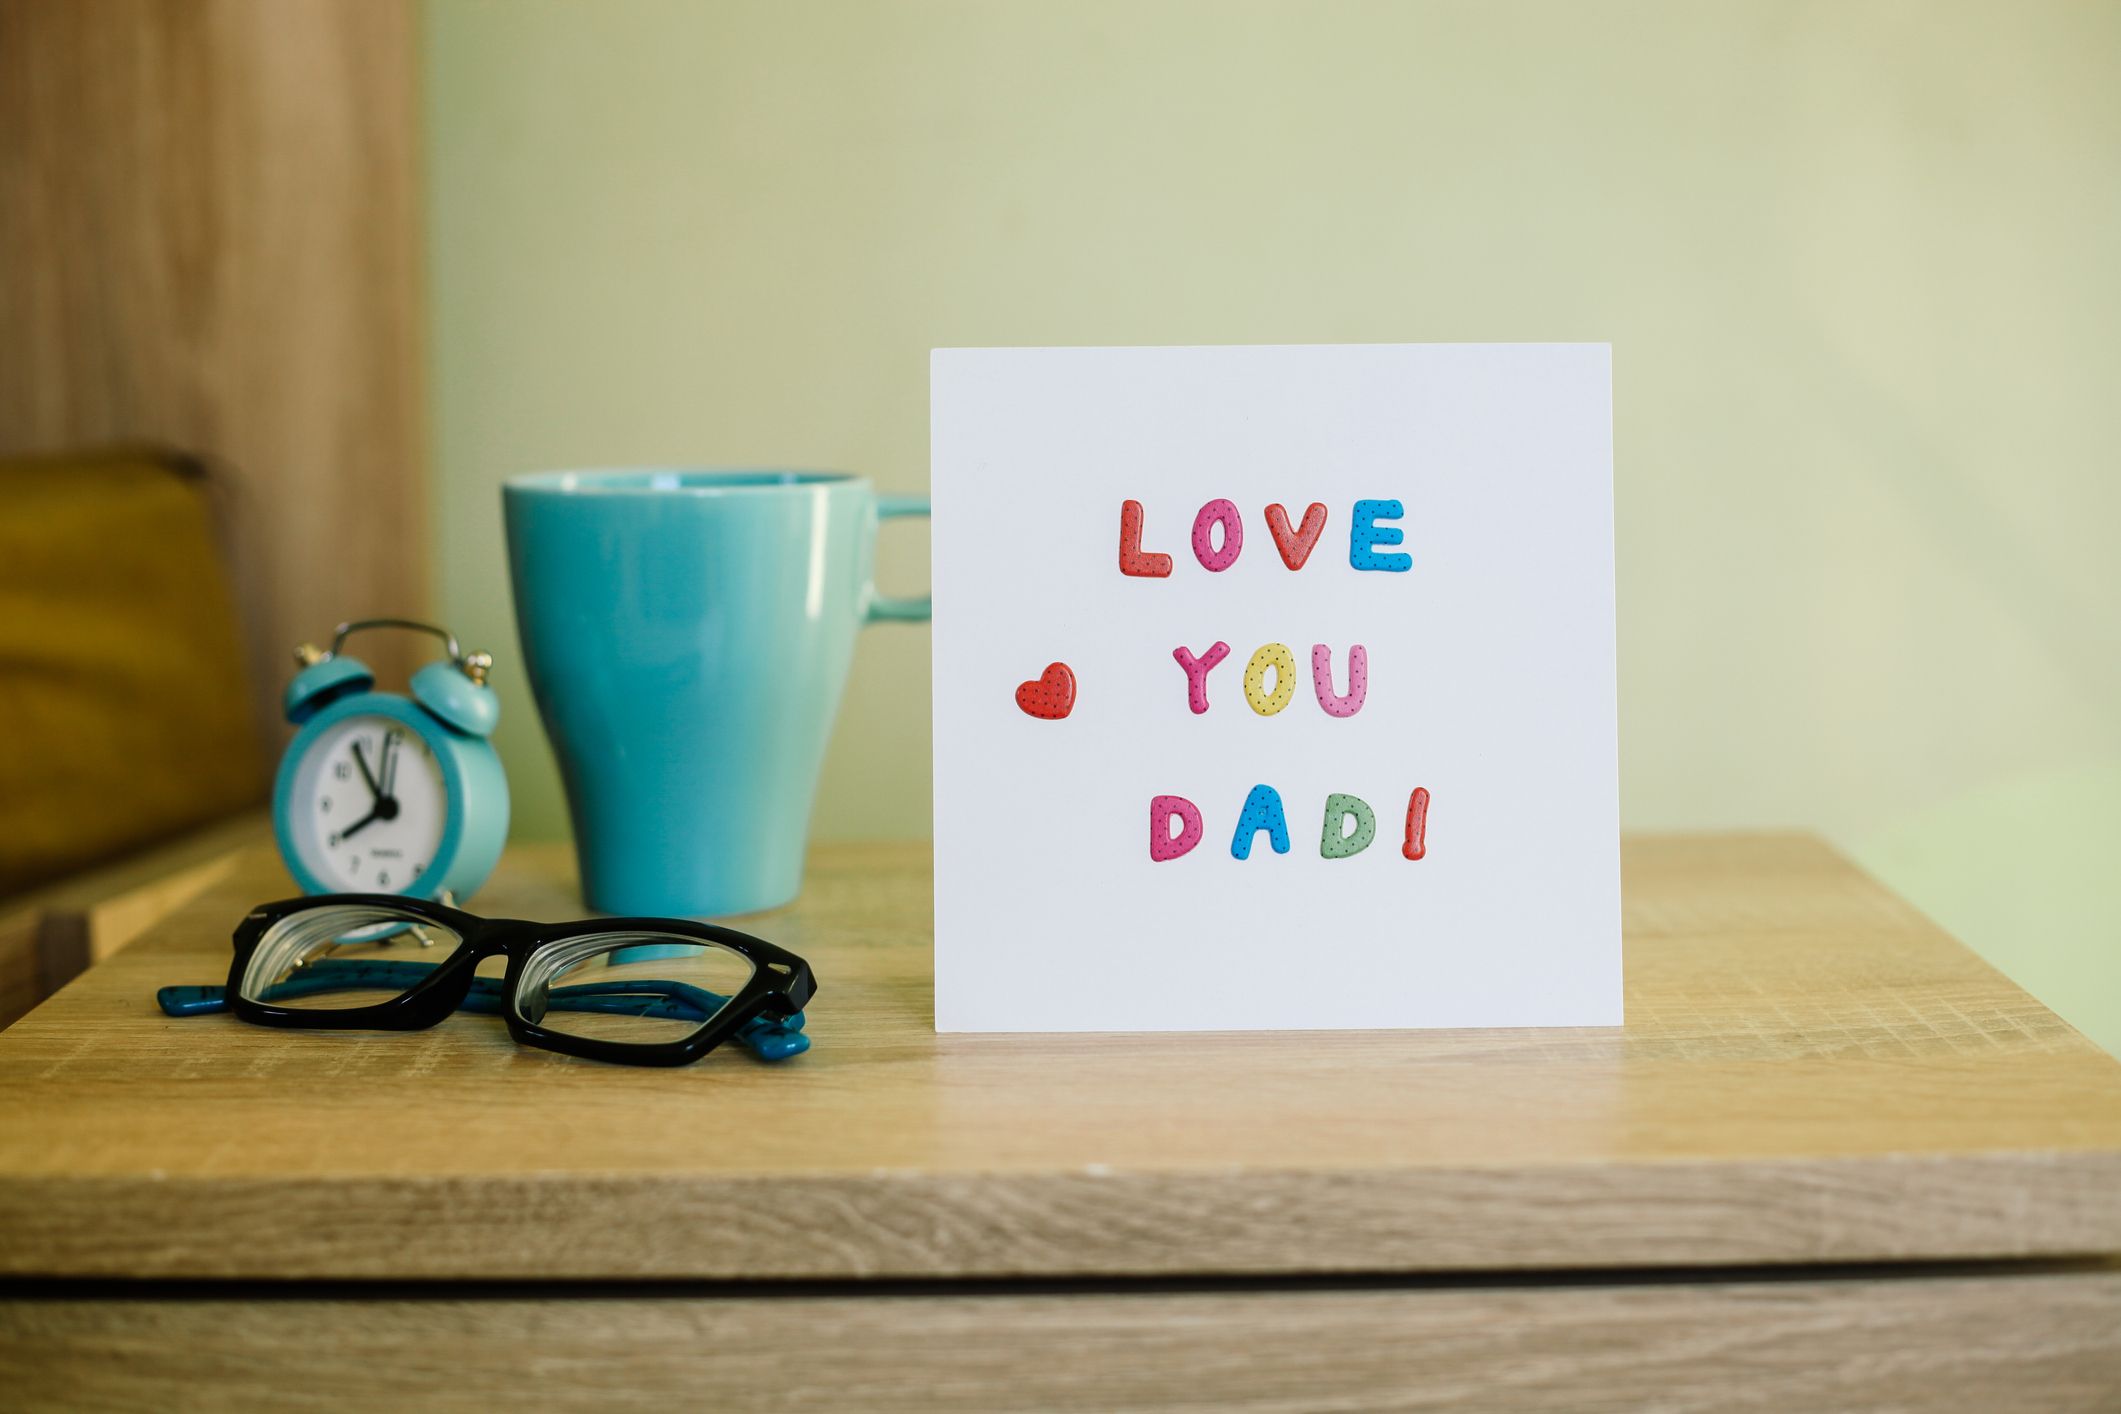 Best Dad Ever Kids Best Fathers Day Gifts from Daughter Cool Birthday Present for Men Unique Gag Gift Idea for Him from Daughter Wife Fathers Day Gifts for Dad Guys Son 